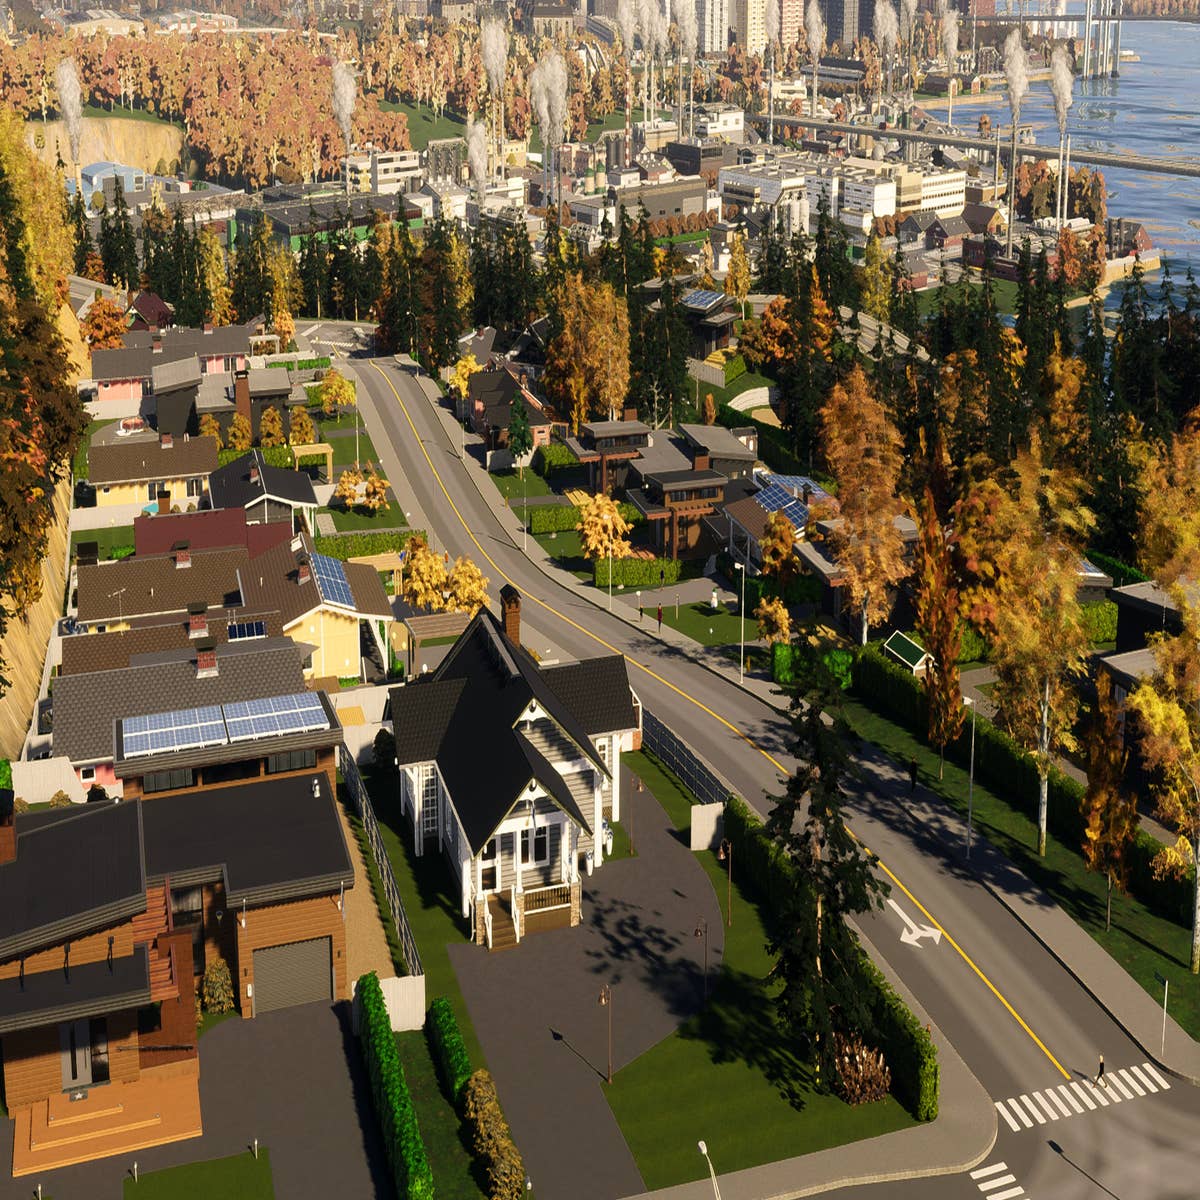 Cities: Skylines 2: release date, trailers, gameplay, and more